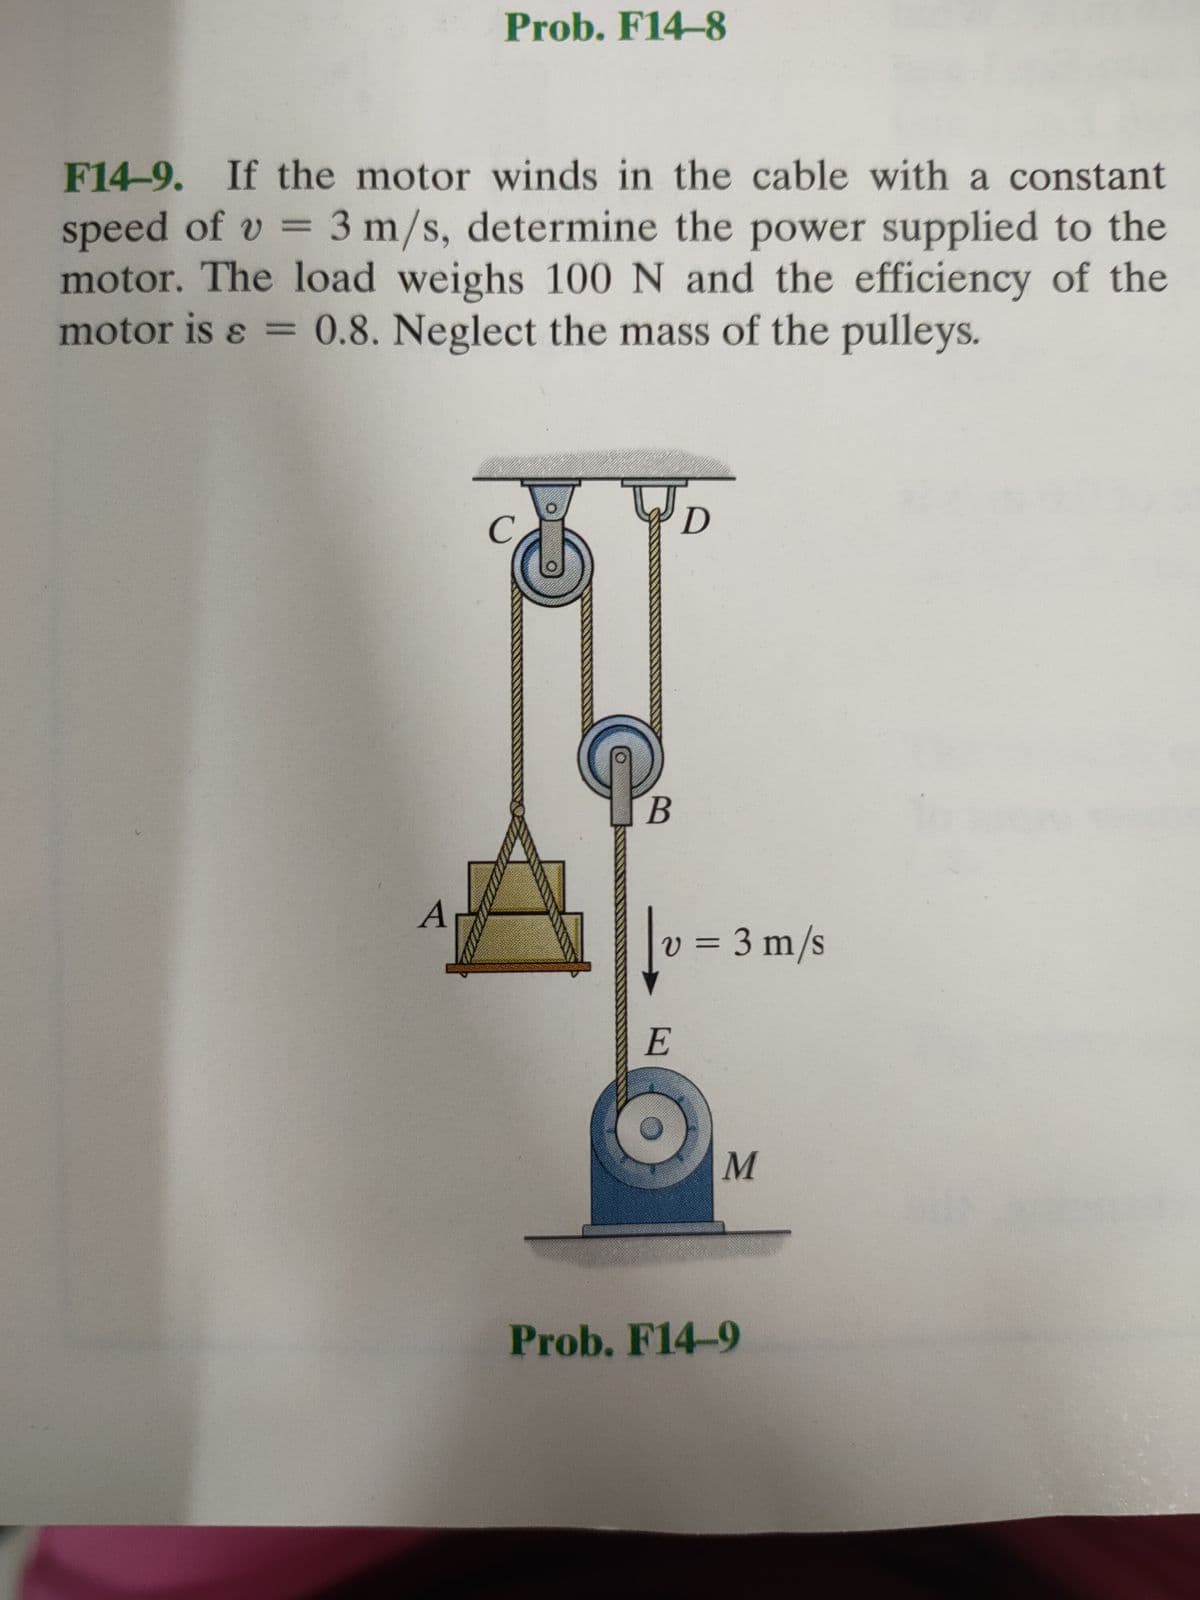 Prob. F14-8
F14-9. If the motor winds in the cable with a constant
speed of v = 3 m/s, determine the power supplied to the
motor. The load weighs 100 N and the efficiency of the
motor is ɛ = 0.8. Neglect the mass of the pulleys.
C
D
B.
A
lv= 3 m/s
%3D
E
Prob. F14-9
